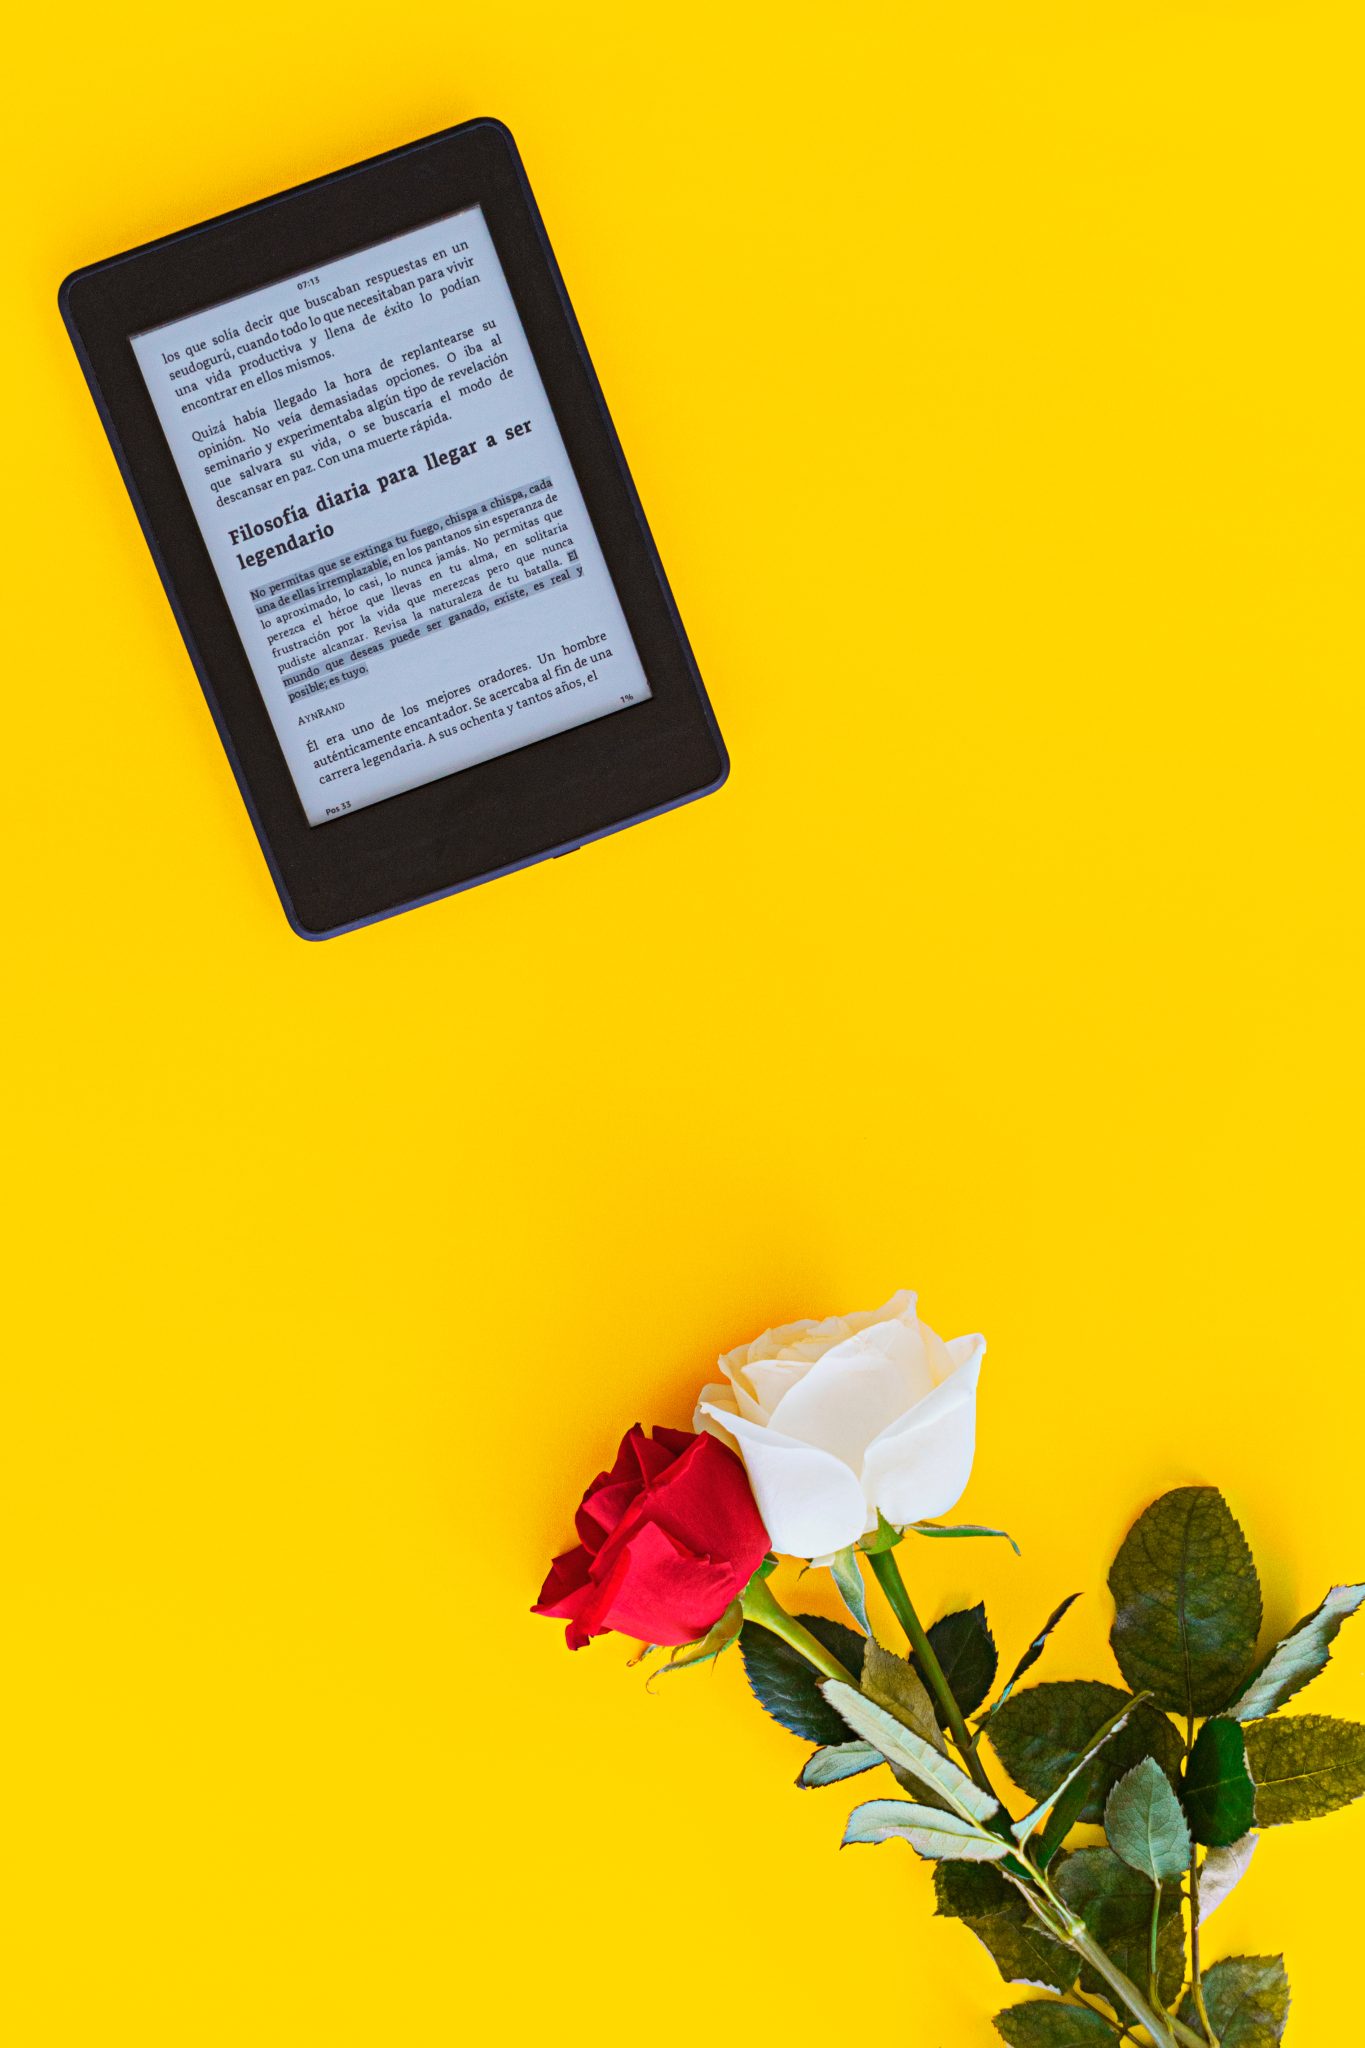 Kindle sobre fondo amarillo con rosas laterales

Kindle on yellow background with side roses